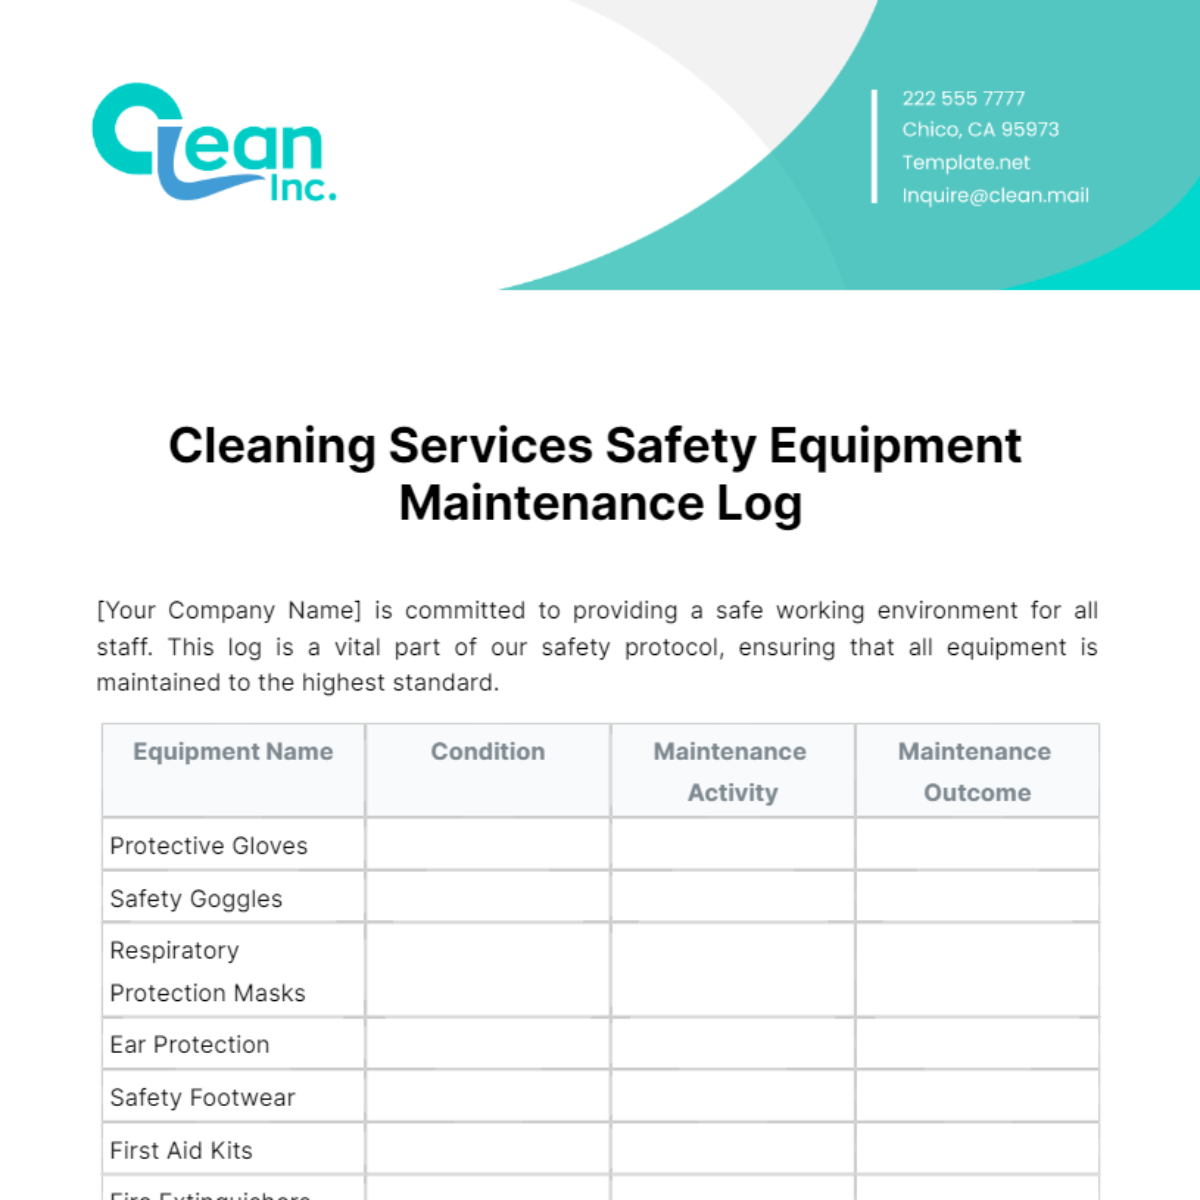 Cleaning Services Safety Equipment Maintenance Log Template